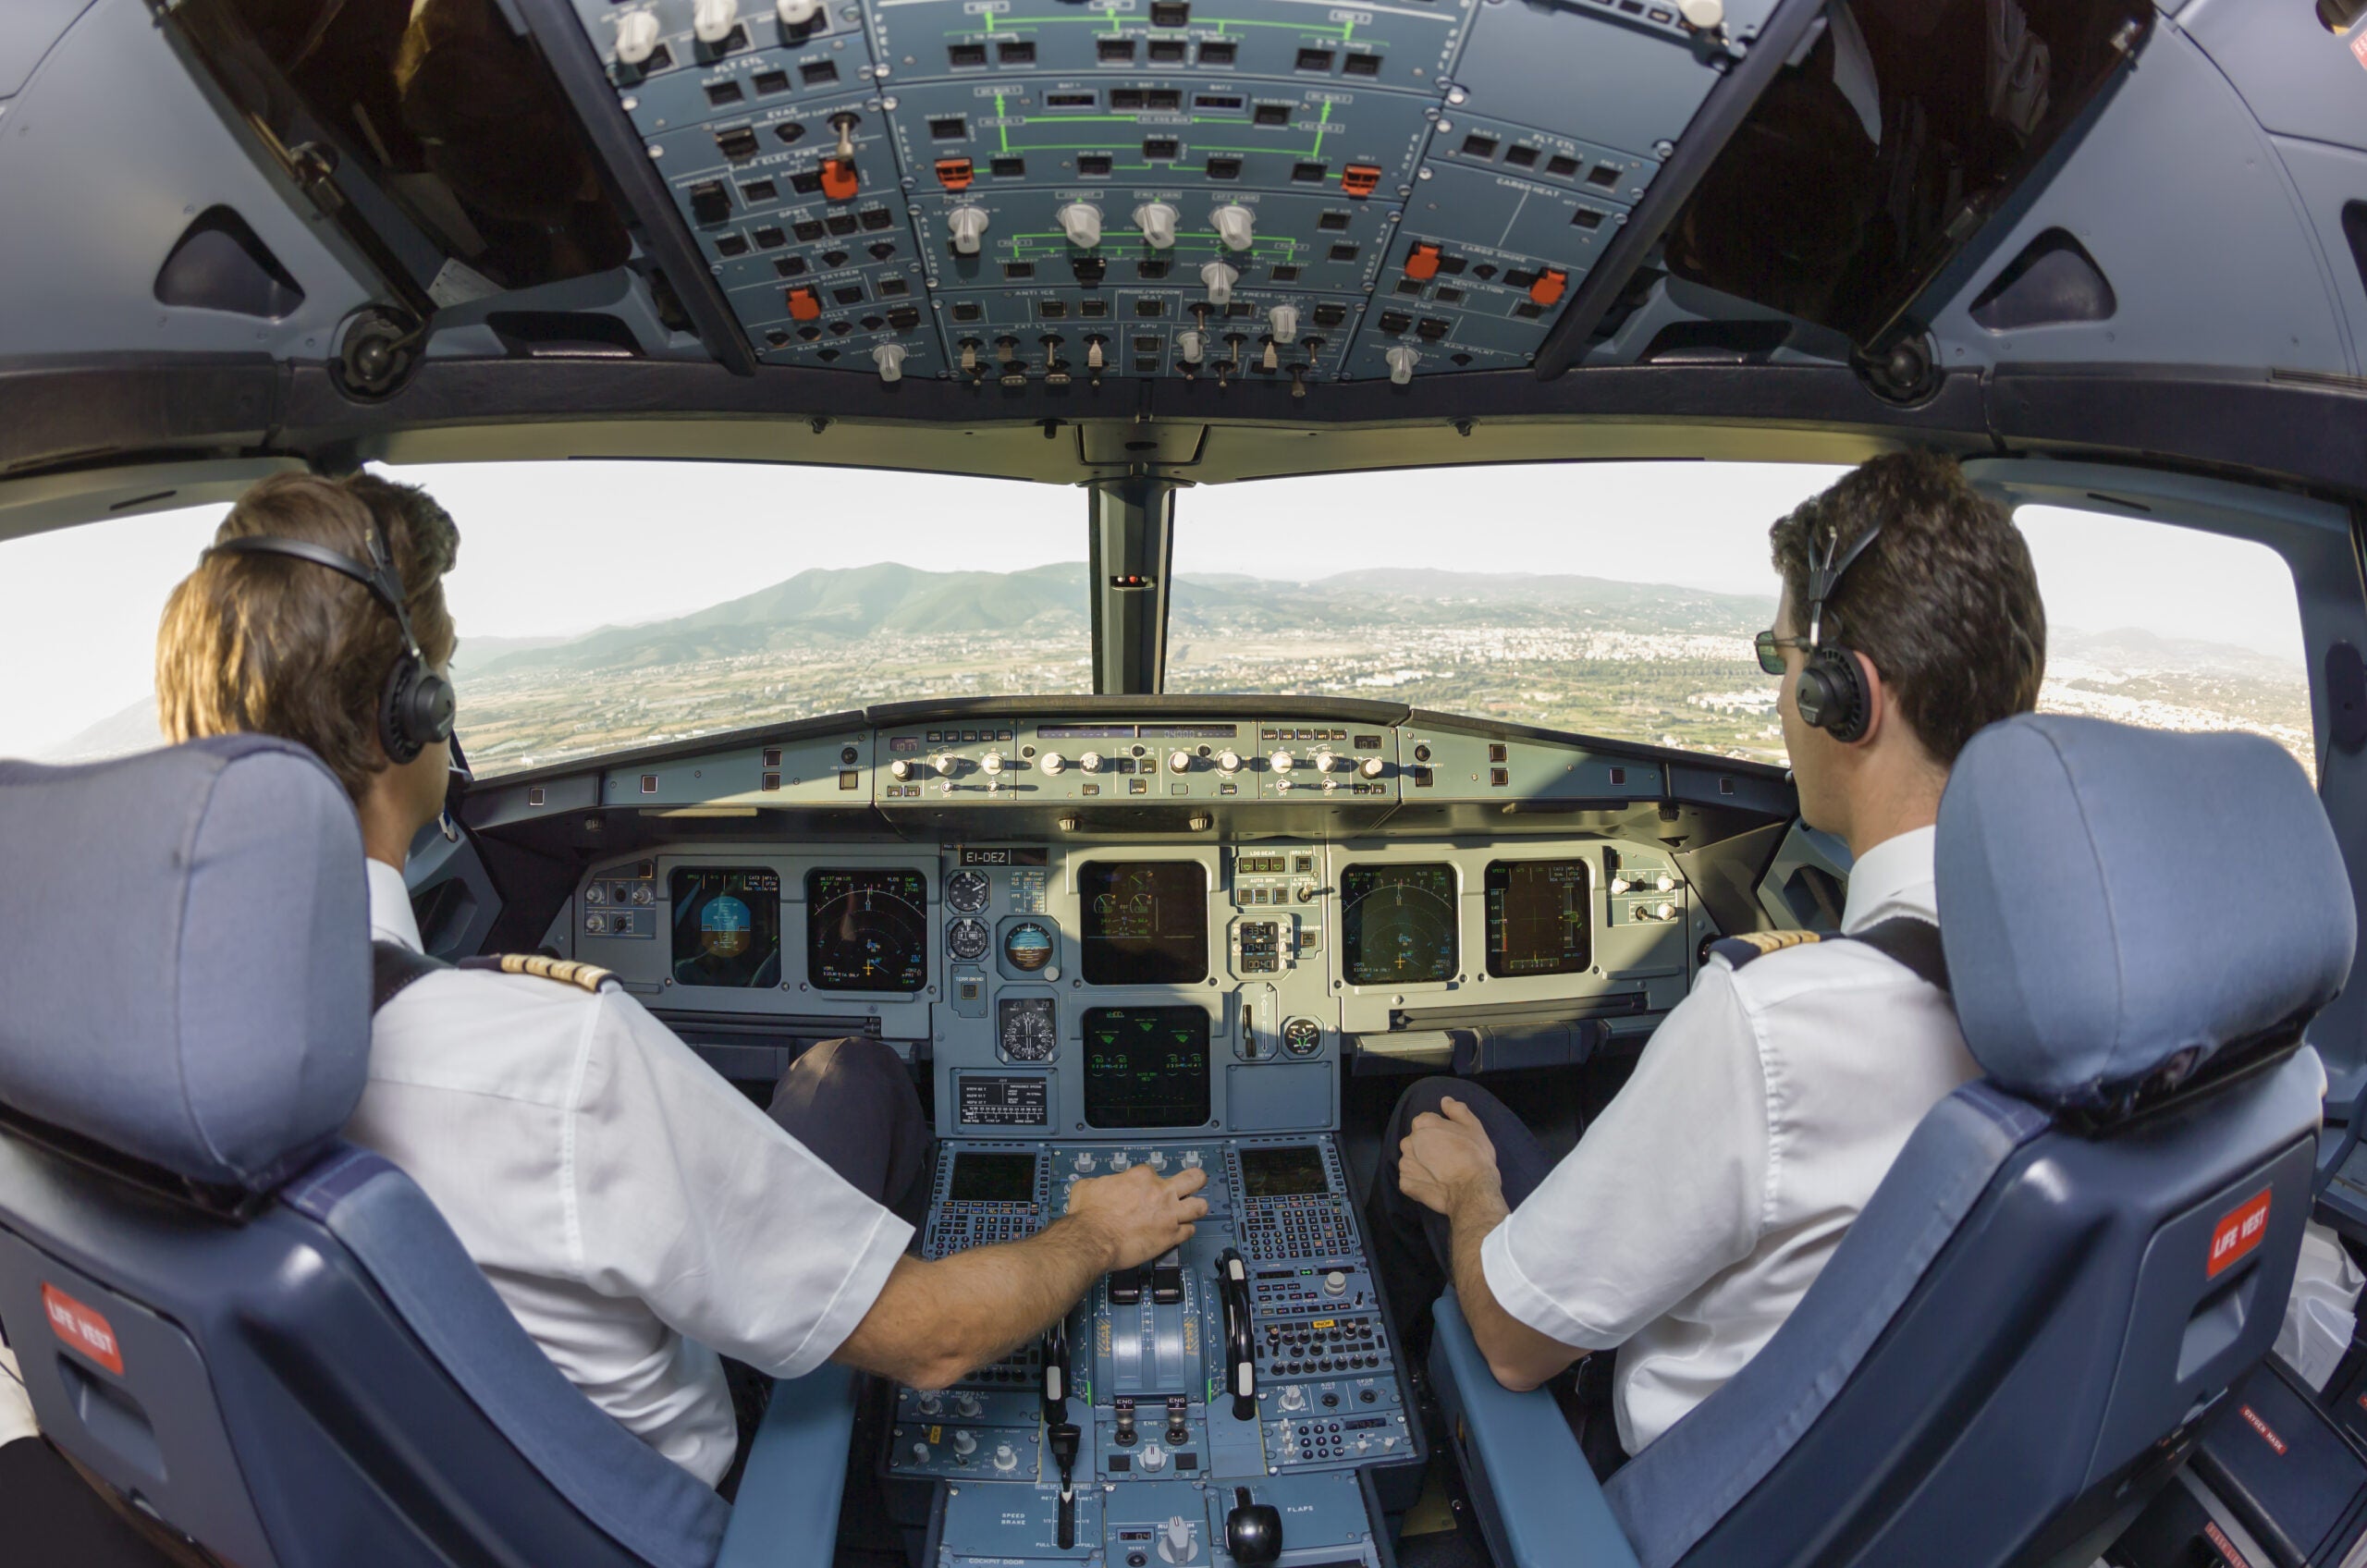 If You Want to Be an Airline Pilot, Do You Need a College Degree?